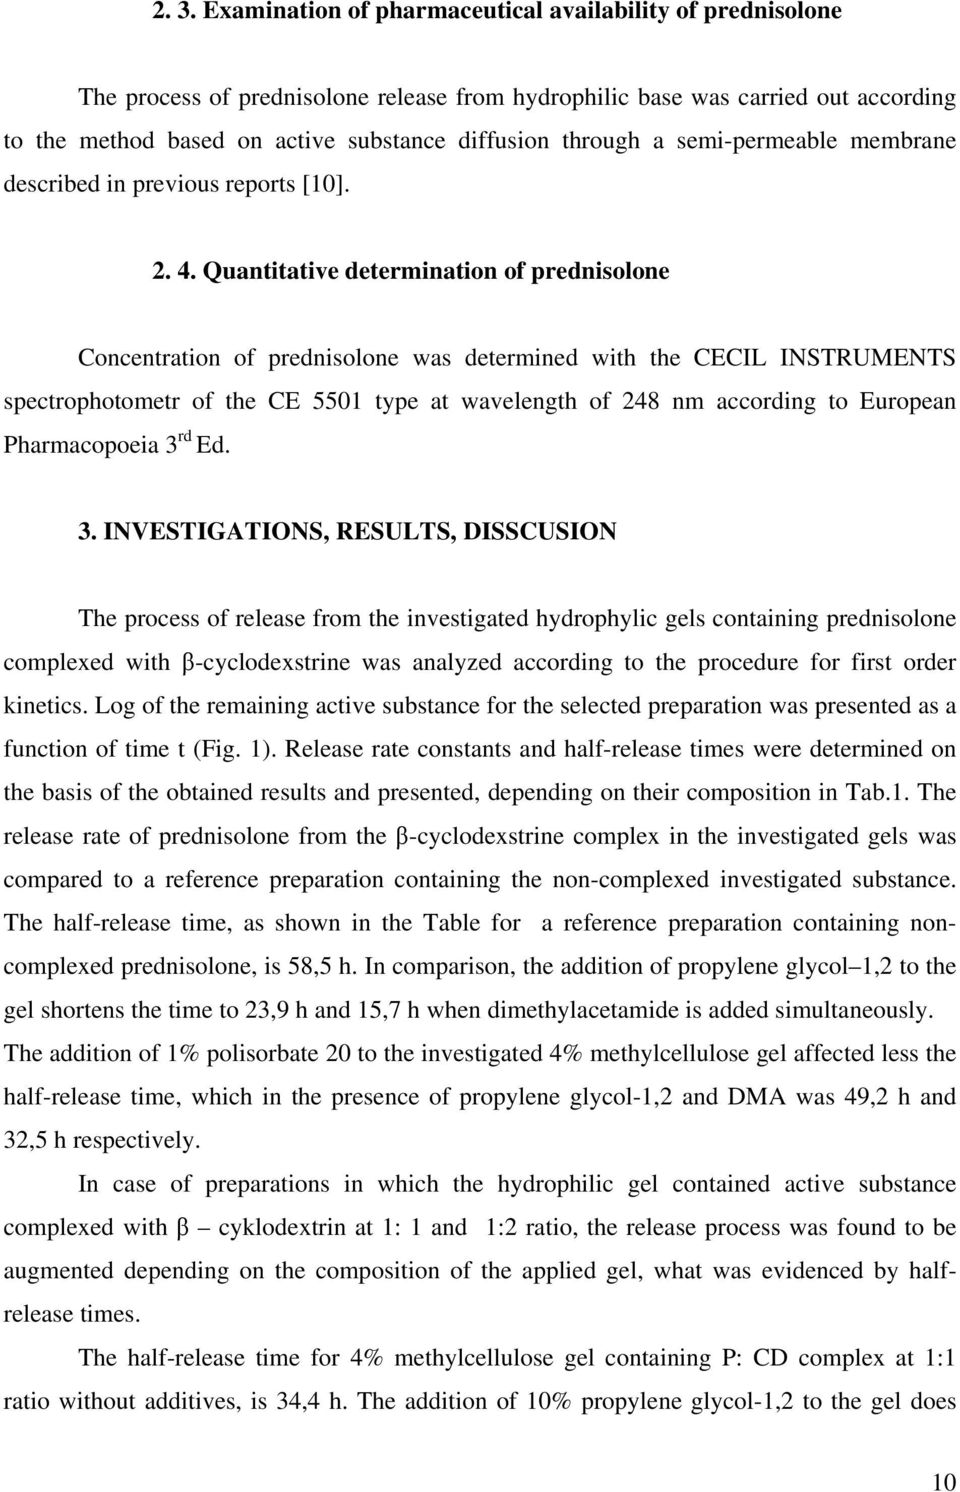 Quantitative determination of prednisolone Concentration of prednisolone was determined with the CECIL INSTRUMENTS spectrophotometr of the CE 5501 type at wavelength of 248 nm according to European